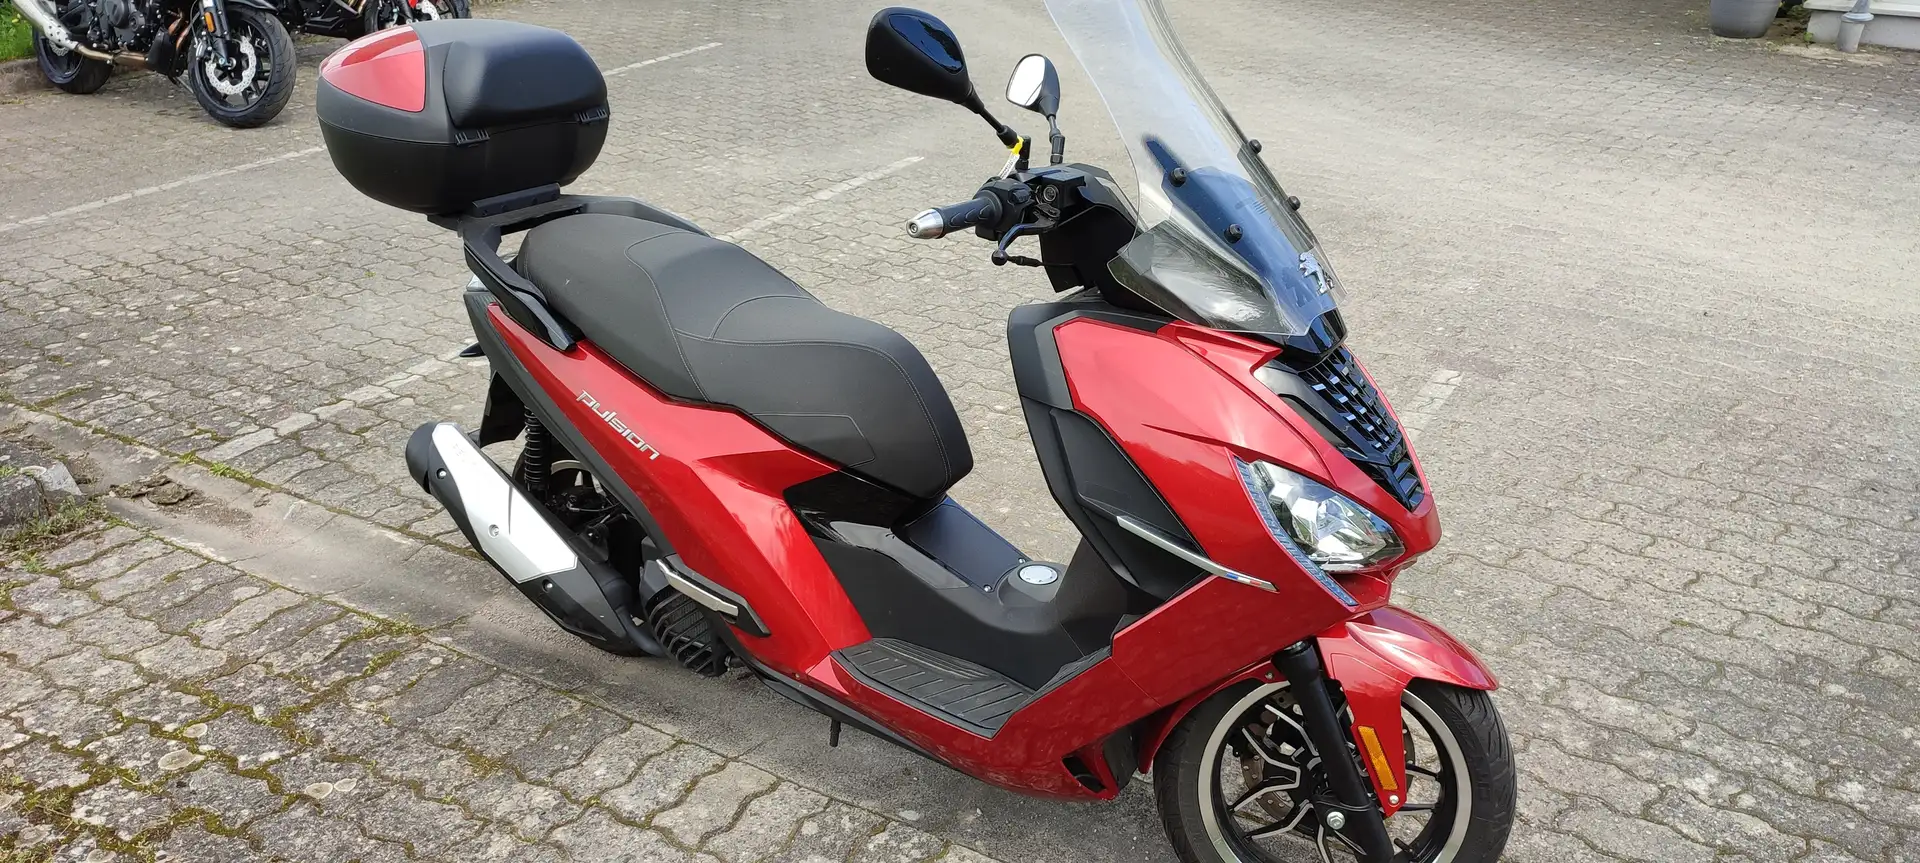 Peugeot Pulsion 125i ABS  mit Topcase Red - 1